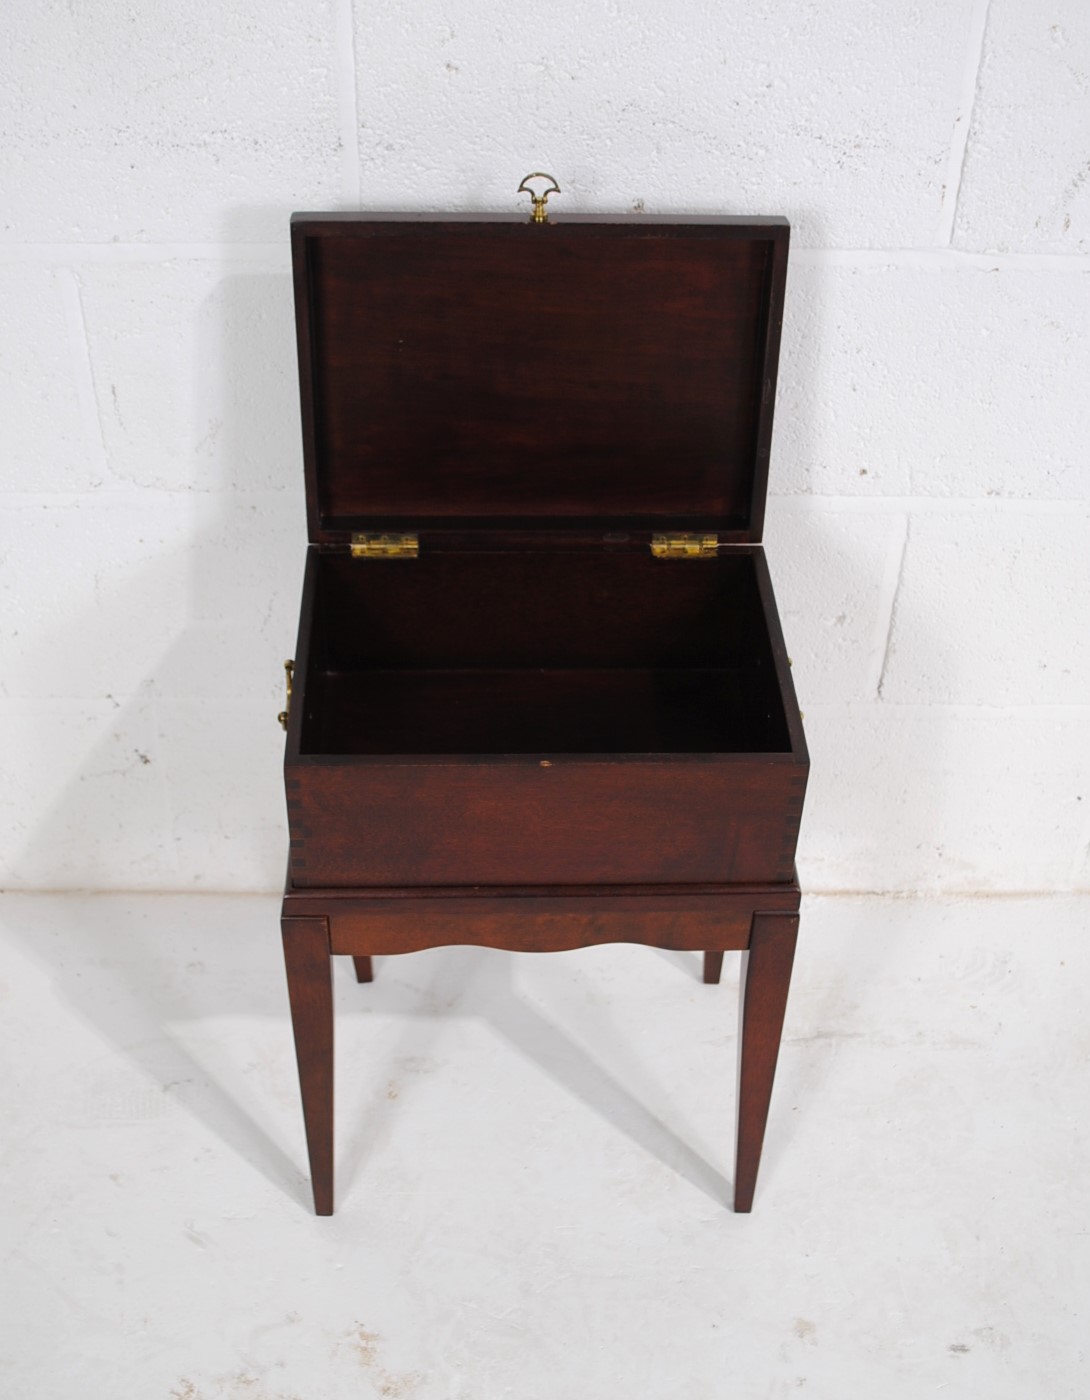 A small mahogany box on stand, with brass handles - height 54cm - Image 4 of 4